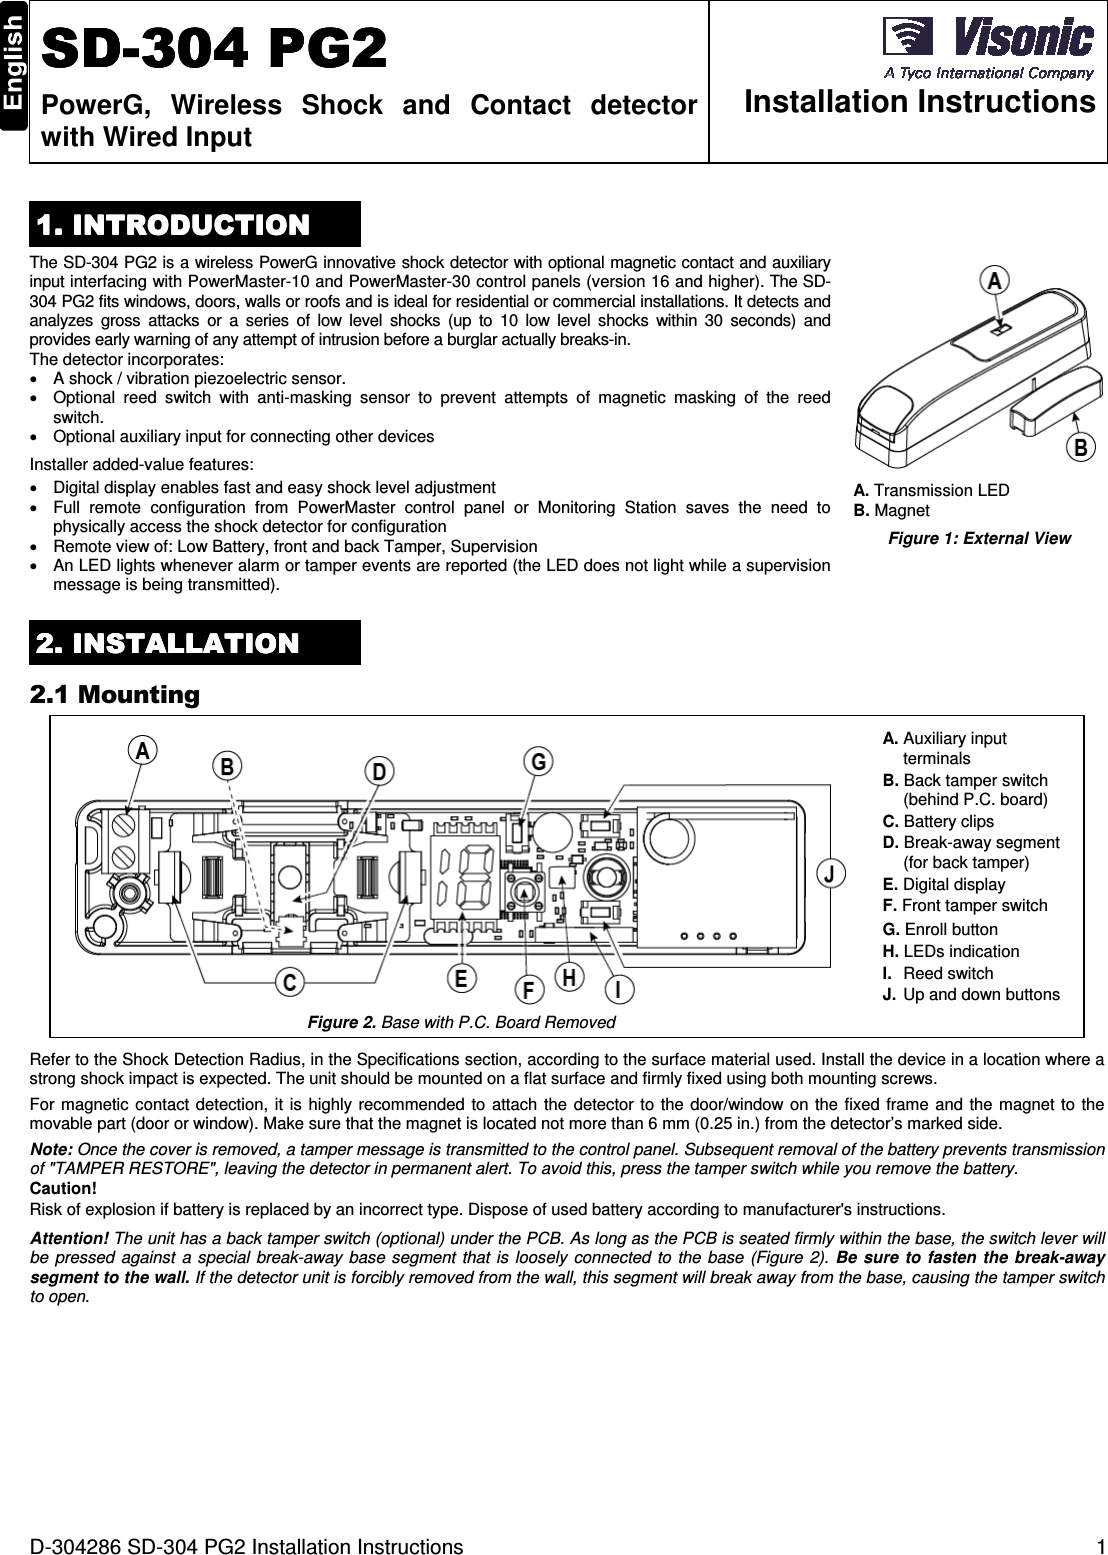 D-304286 SD-304 PG2 Installation Instructions  1  SDSDSDSD----304 PG2304 PG2304 PG2304 PG2    PowerG,  Wireless  Shock  and  Contact  detector with Wired Input  Installation Instructions 1. INTRODUCTION1. INTRODUCTION1. INTRODUCTION1. INTRODUCTION    The SD-304 PG2 is a wireless PowerG innovative shock detector with optional magnetic contact and auxiliary input interfacing with PowerMaster-10 and PowerMaster-30 control panels (version 16 and higher). The SD-304 PG2 fits windows, doors, walls or roofs and is ideal for residential or commercial installations. It detects and analyzes  gross  attacks  or  a  series  of  low  level  shocks  (up  to  10  low  level  shocks  within  30  seconds)  and provides early warning of any attempt of intrusion before a burglar actually breaks-in. The detector incorporates: •  A shock / vibration piezoelectric sensor. •  Optional  reed  switch  with  anti-masking  sensor  to  prevent  attempts  of  magnetic  masking  of  the  reed switch. •  Optional auxiliary input for connecting other devices  Installer added-value features: •  Digital display enables fast and easy shock level adjustment •  Full  remote  configuration  from  PowerMaster  control  panel  or  Monitoring  Station  saves  the  need  to physically access the shock detector for configuration  •  Remote view of: Low Battery, front and back Tamper, Supervision •  An LED lights whenever alarm or tamper events are reported (the LED does not light while a supervision message is being transmitted).  A. Transmission LED  B. Magnet Figure 1: External View 2222. INSTALLATION. INSTALLATION. INSTALLATION. INSTALLATION    2.1 Mounting  A. Auxiliary input terminals B. Back tamper switch (behind P.C. board)  C. Battery clips D. Break-away segment (for back tamper) E. Digital display F. Front tamper switch G. Enroll button H. LEDs indication  I.  Reed switch J.  Up and down buttons Figure 2. Base with P.C. Board Removed Refer to the Shock Detection Radius, in the Specifications section, according to the surface material used. Install the device in a location where a strong shock impact is expected. The unit should be mounted on a flat surface and firmly fixed using both mounting screws. For magnetic contact  detection, it  is  highly  recommended  to attach the  detector  to the  door/window on  the fixed frame and  the  magnet to  the movable part (door or window). Make sure that the magnet is located not more than 6 mm (0.25 in.) from the detector’s marked side. Note: Once the cover is removed, a tamper message is transmitted to the control panel. Subsequent removal of the battery prevents transmission of &quot;TAMPER RESTORE&quot;, leaving the detector in permanent alert. To avoid this, press the tamper switch while you remove the battery. Caution! Risk of explosion if battery is replaced by an incorrect type. Dispose of used battery according to manufacturer&apos;s instructions. Attention! The unit has a back tamper switch (optional) under the PCB. As long as the PCB is seated firmly within the base, the switch lever will be  pressed  against  a  special  break-away  base  segment  that  is  loosely  connected  to  the base (Figure  2).  Be sure  to  fasten  the break-away segment to the wall. If the detector unit is forcibly removed from the wall, this segment will break away from the base, causing the tamper switch to open. 